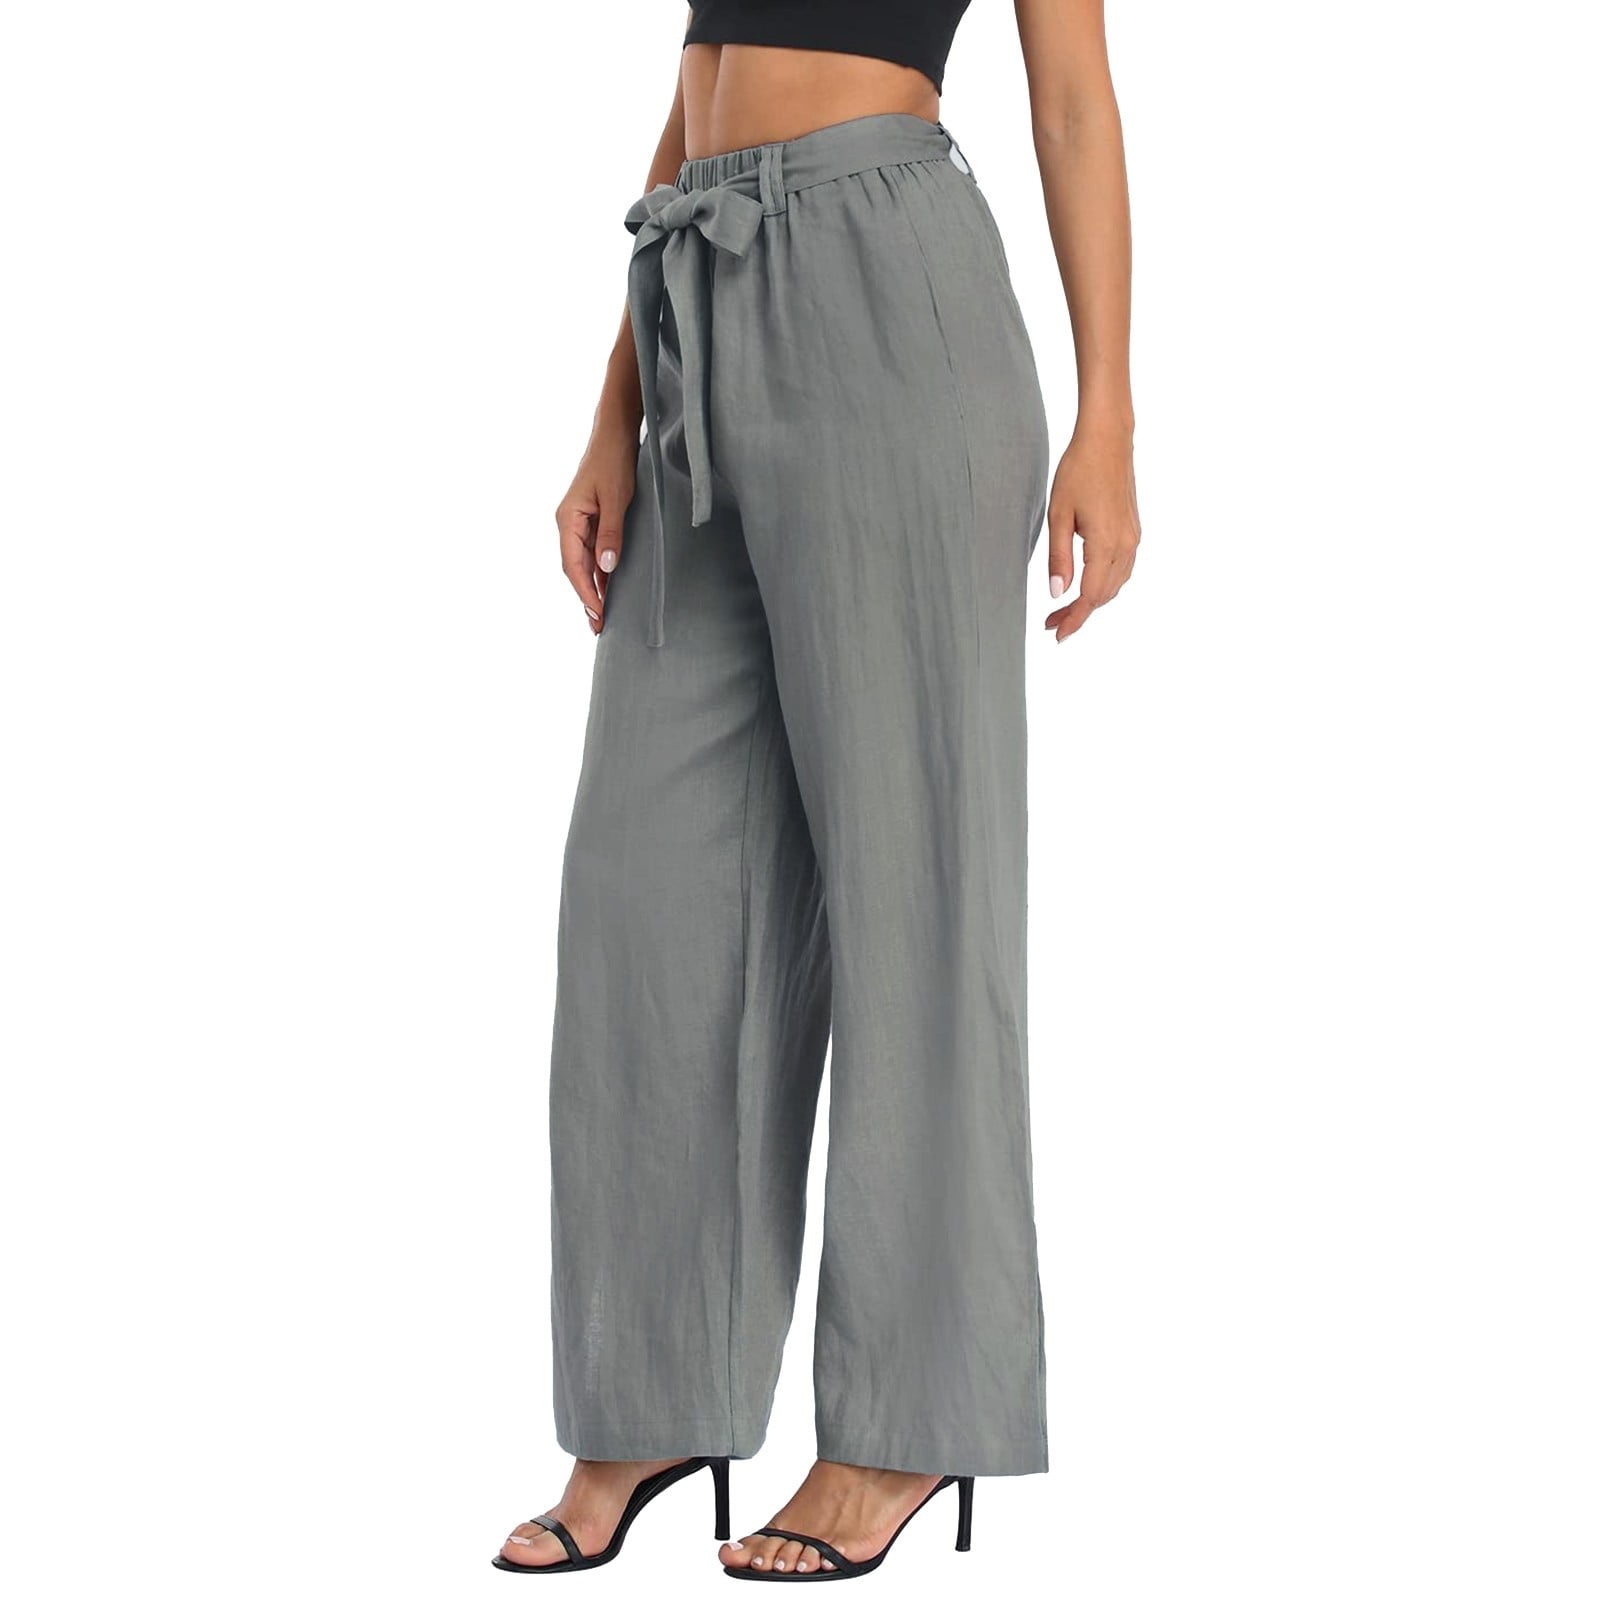 Cathalem Woman Sweat Pants Women's High Waist Palazzo Pants Casual Belted  Wide Leg Pants with Pockets Womens Pants Casual Small Pants Grey XX-Large 